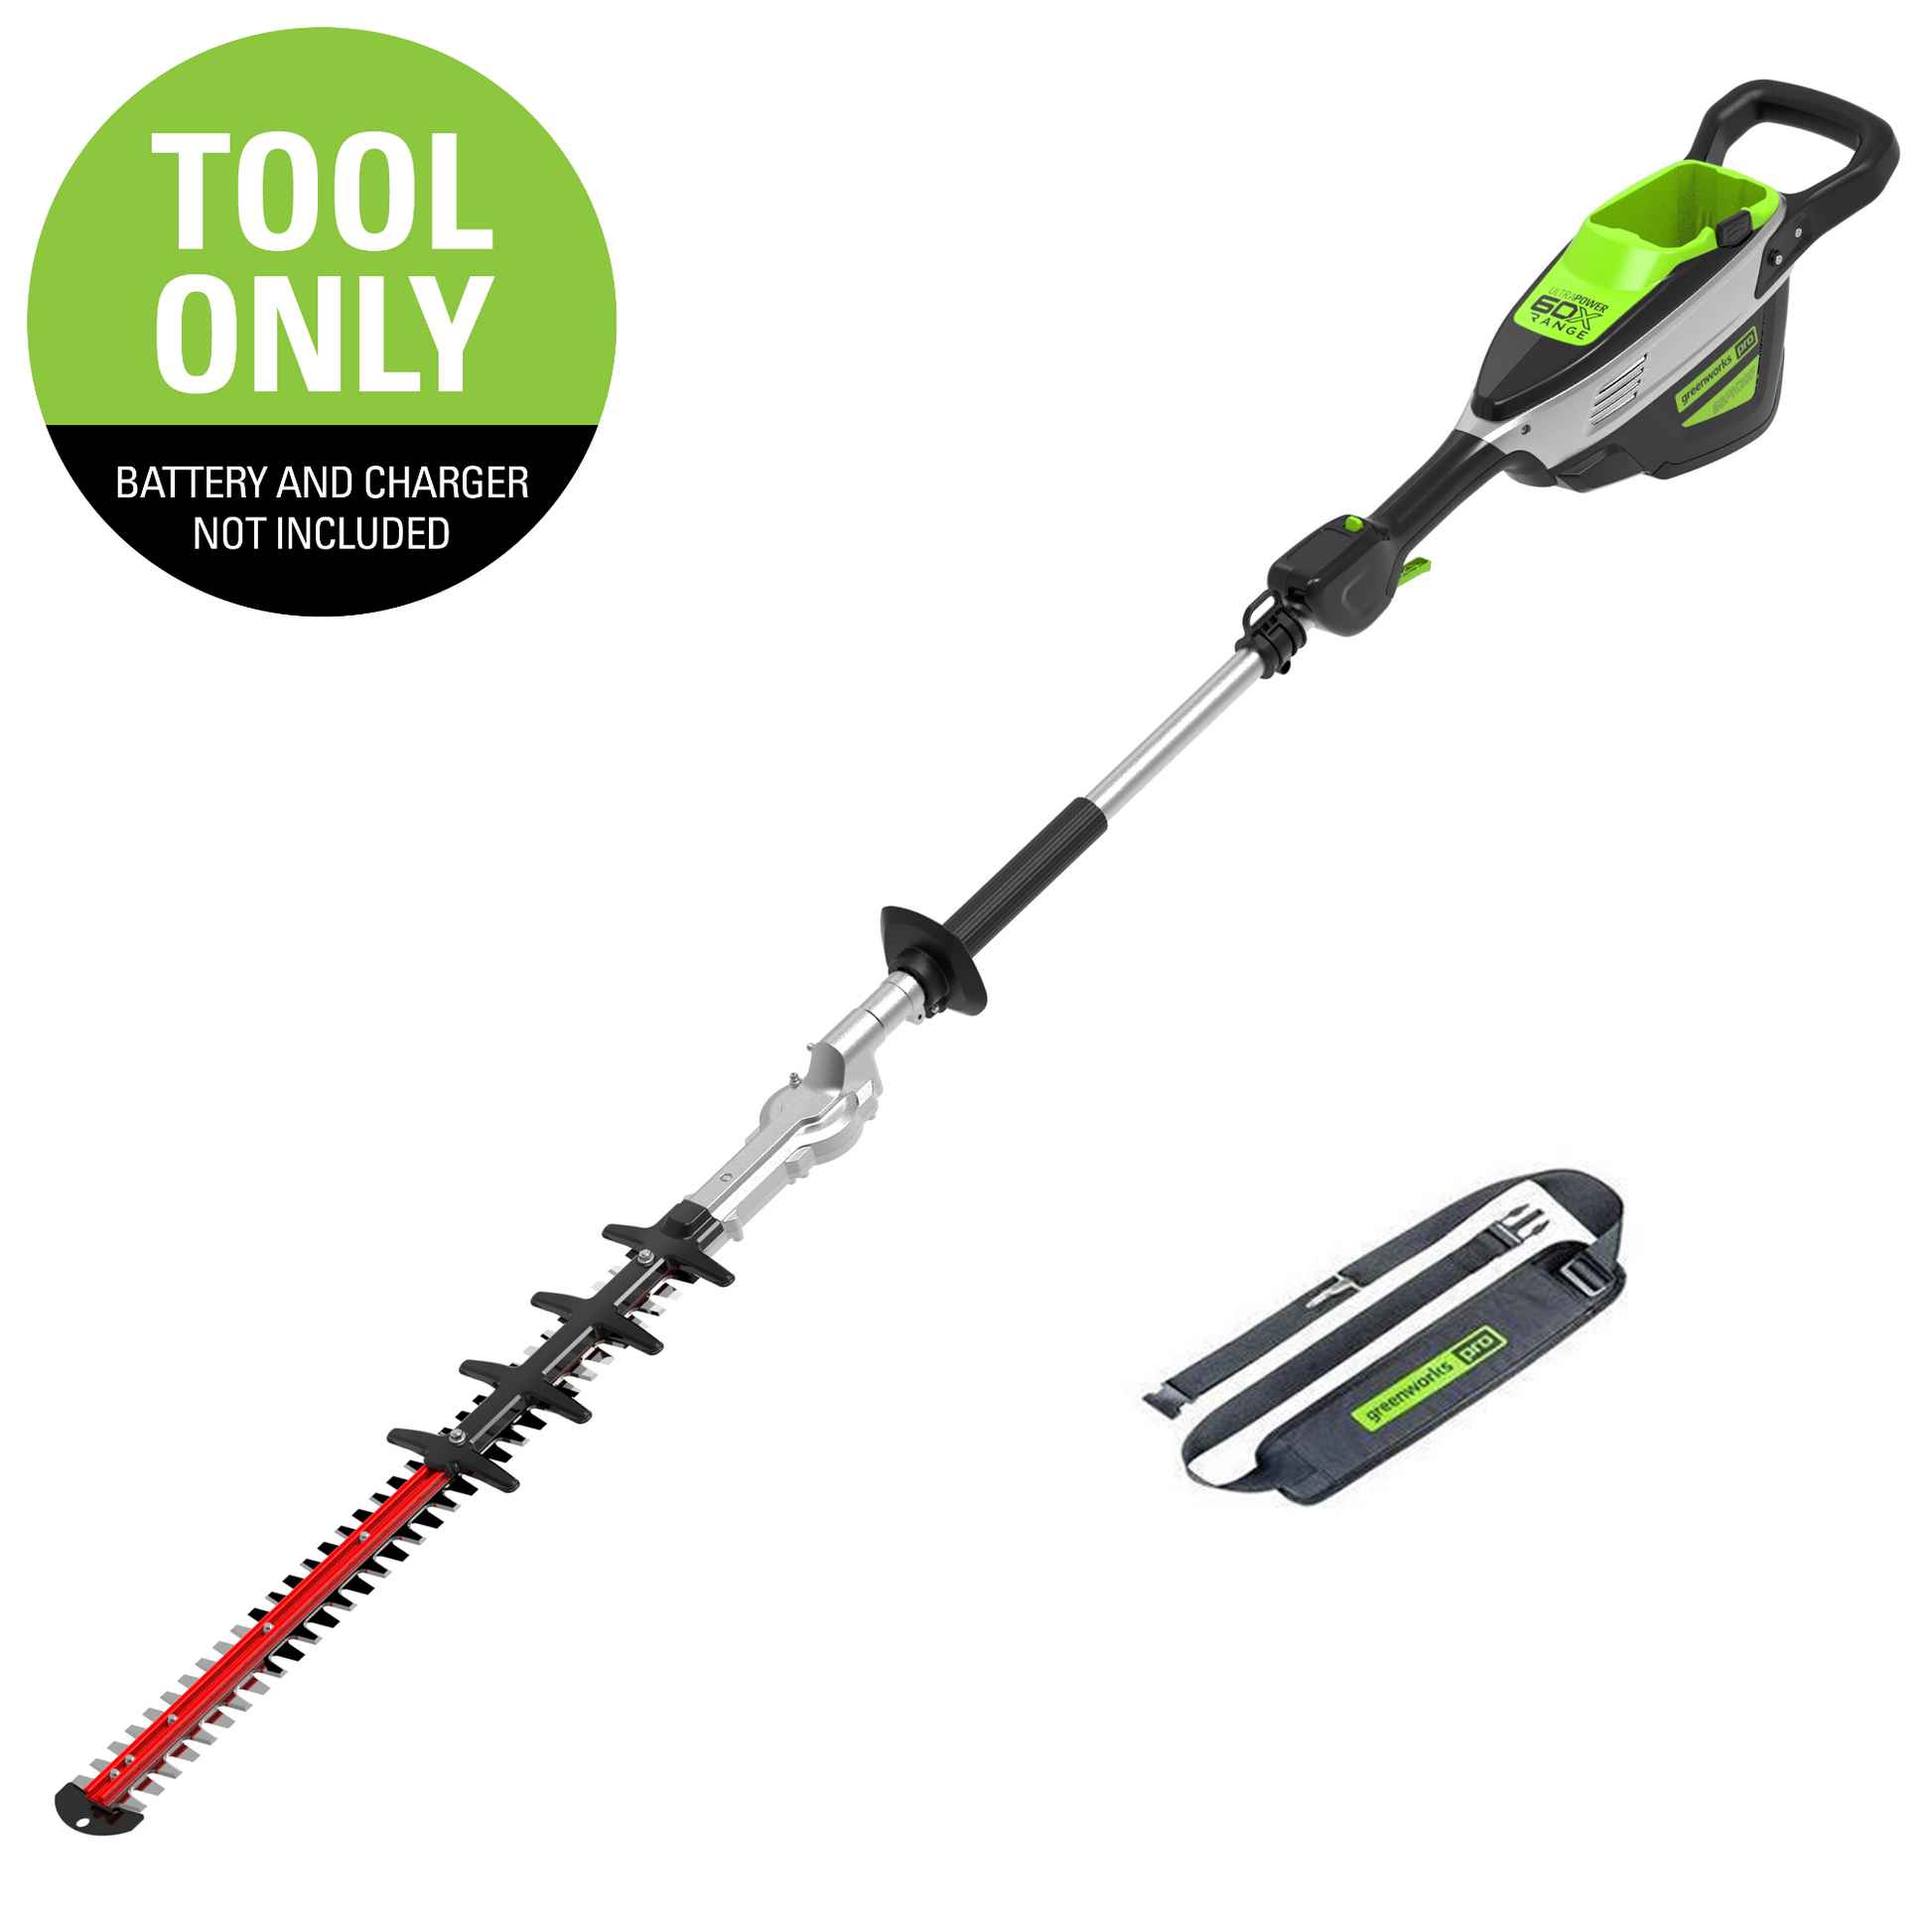 Brand NEW IN BOX Greenworks PRO 26 in. 60V Battery Cordless Hedge Trimmer  (Tool-Only) - Hedge & Weed Trimmers, Facebook Marketplace